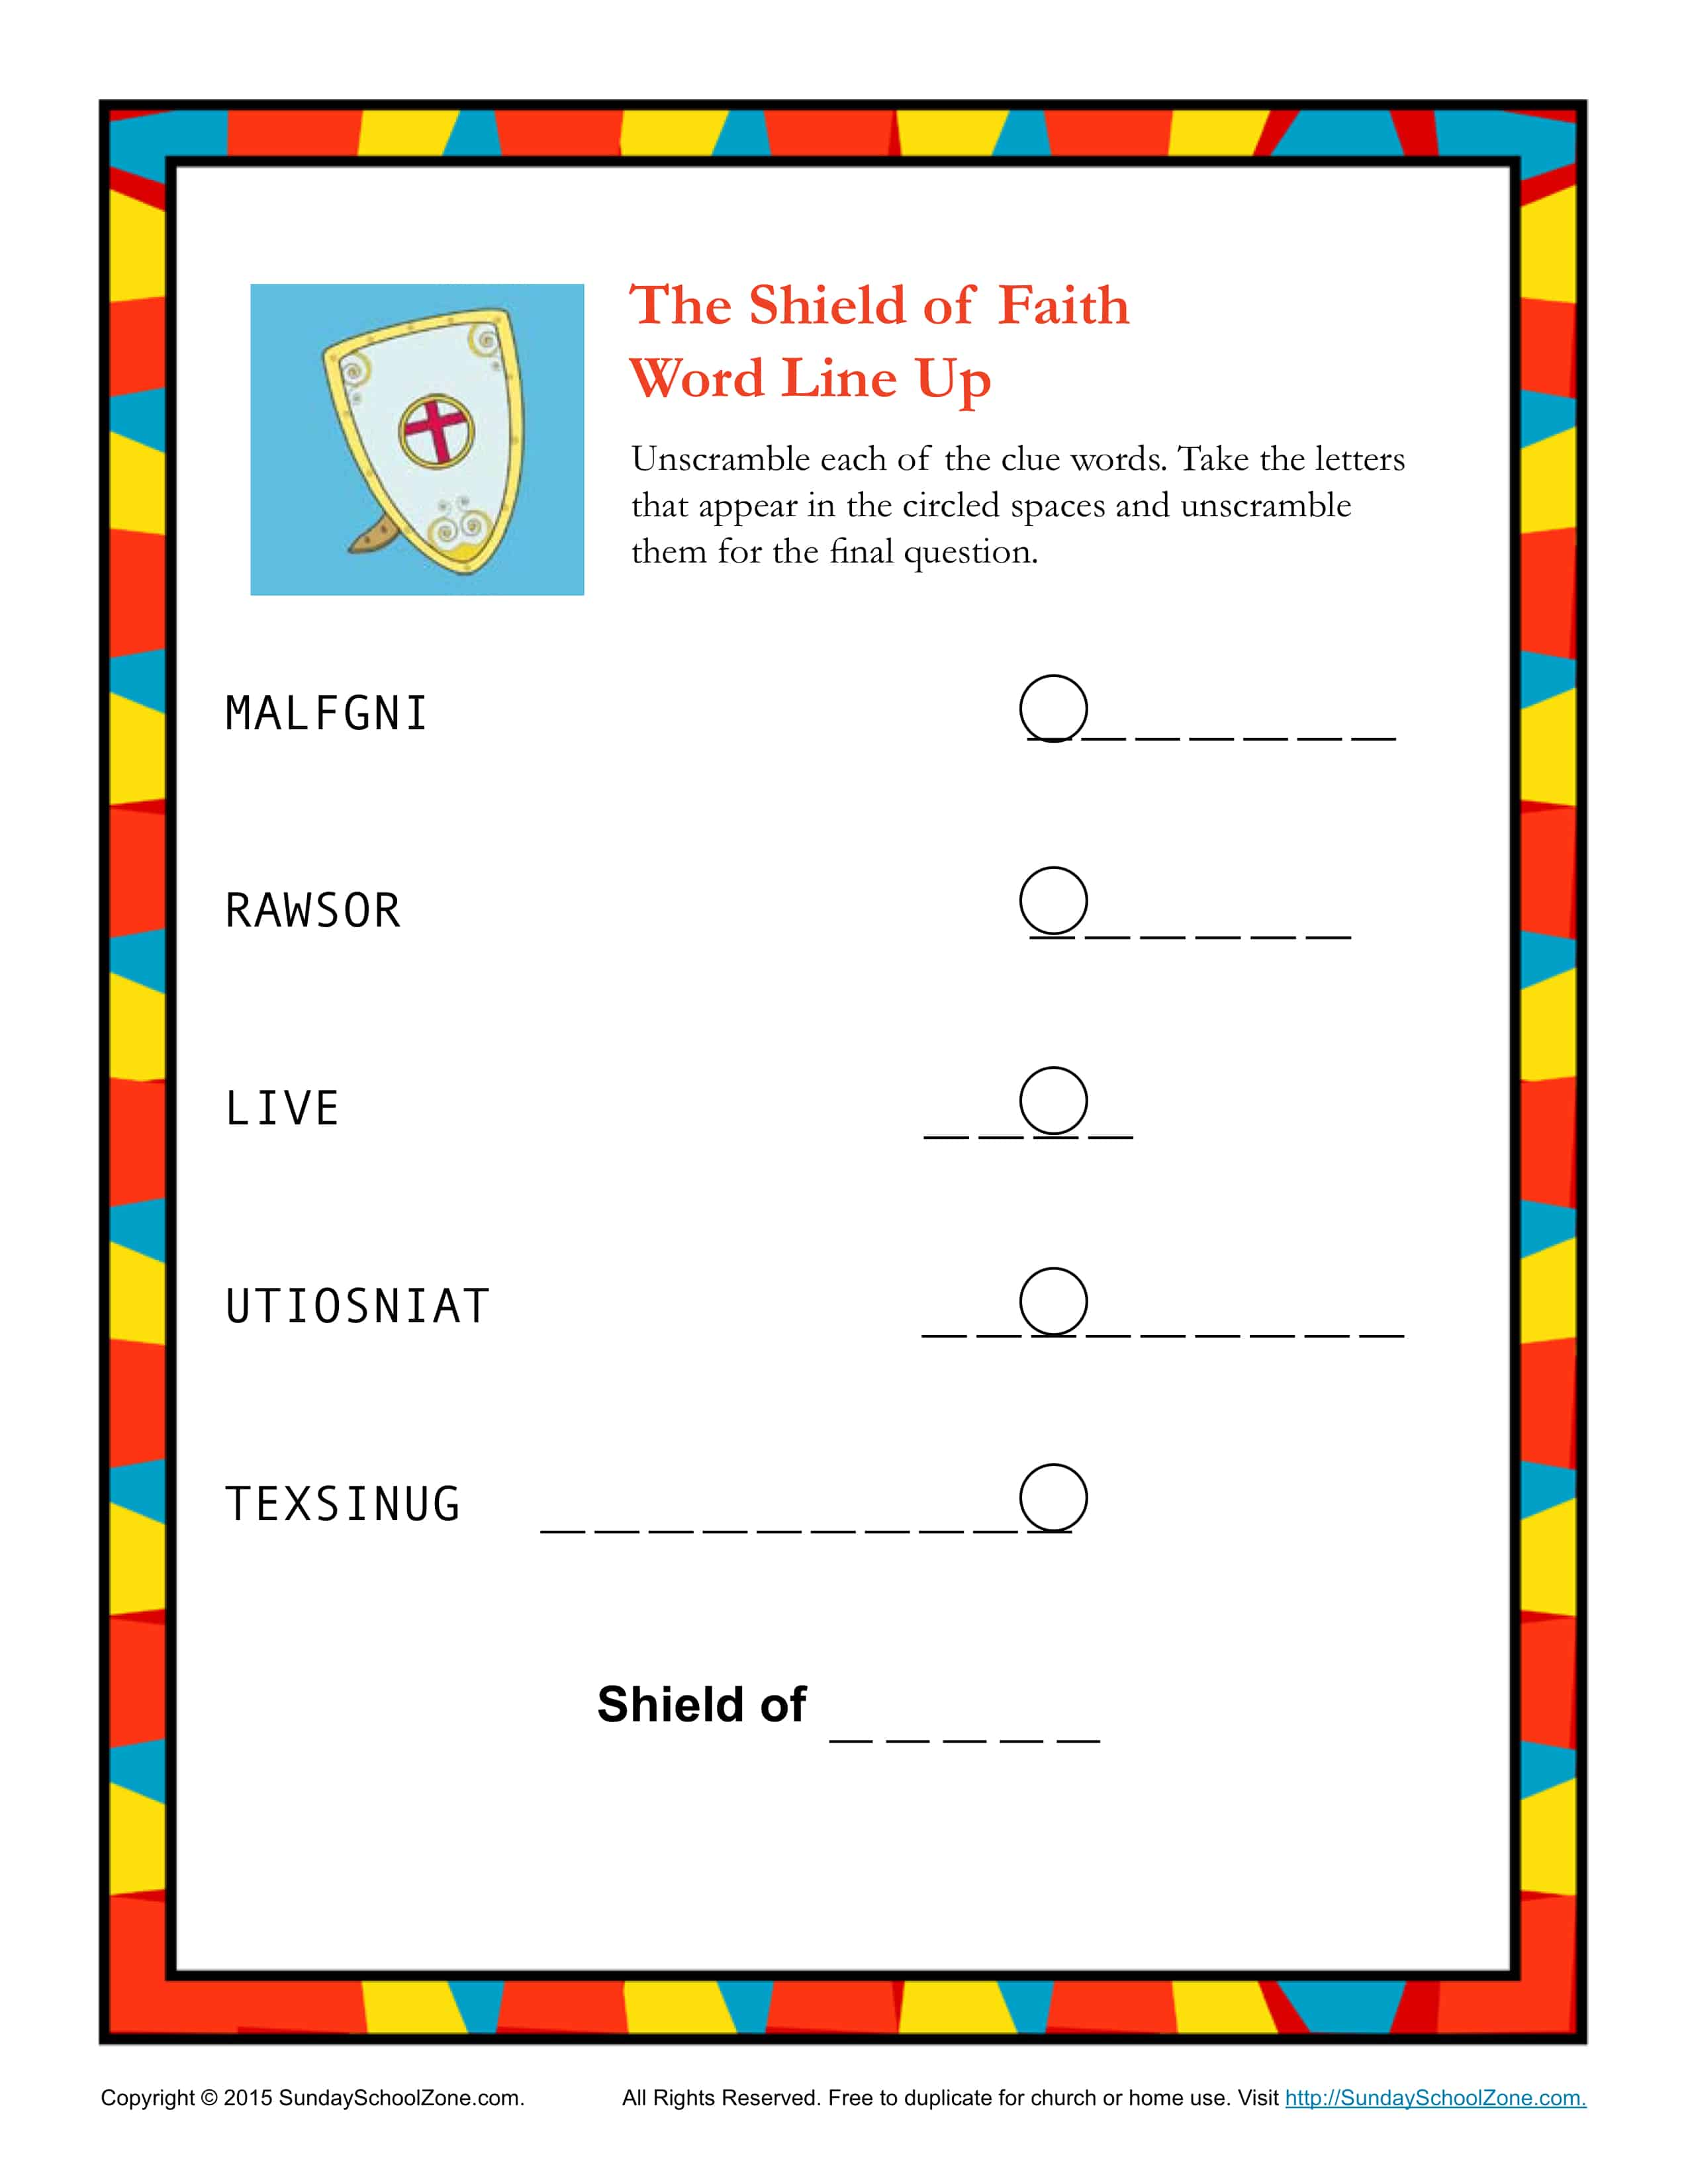 shield of faith word line up childrens bible activities